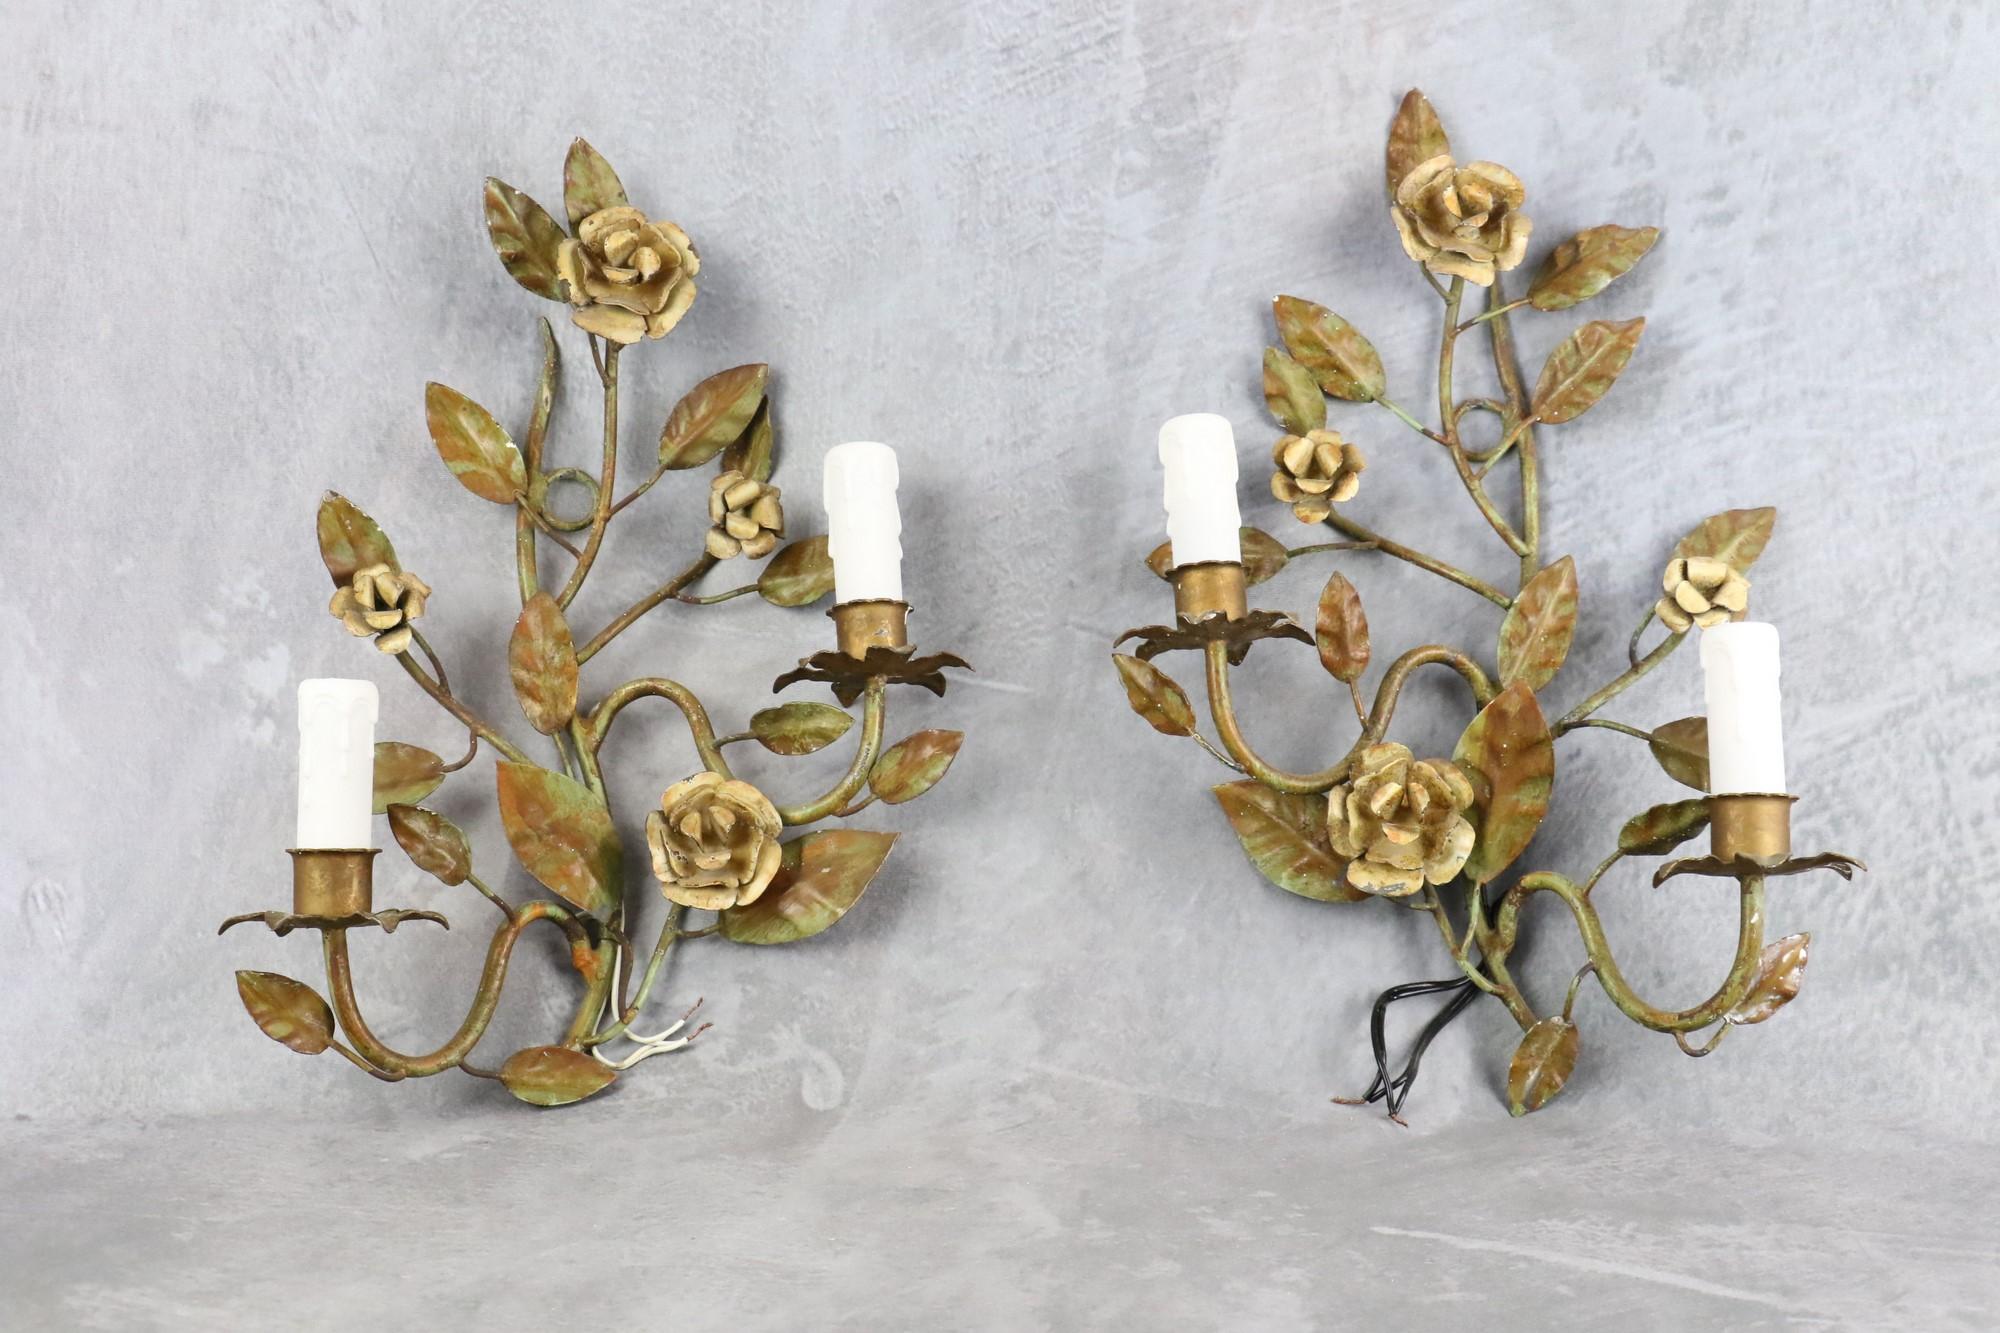 Pair of Florentine sconces decorated with foliage and roses, 1960, Italy

Beautiful pair of sconces in patinated metal, decorated with leaves and roses. The lights are imitation candles. 
Very decorative, they are large without being too imposing.